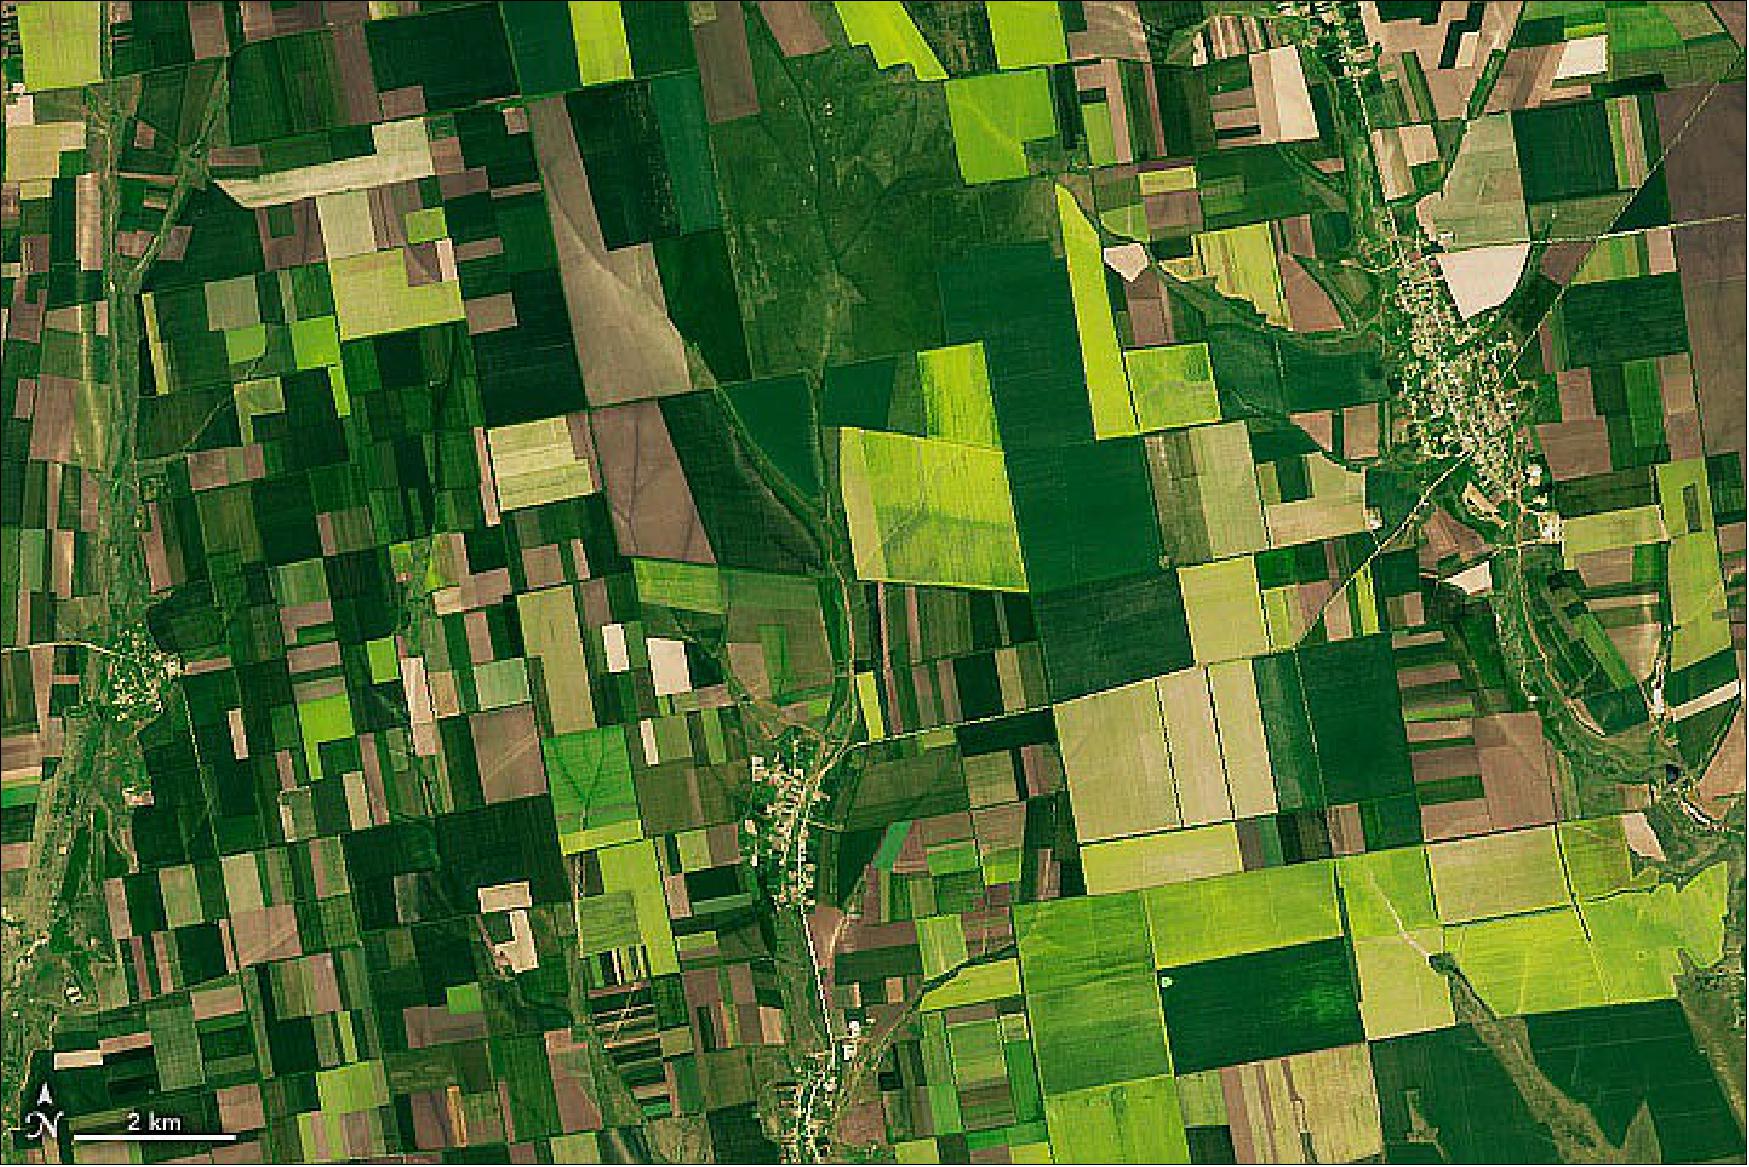 Figure 22: This Landsat-8 image shows fields of canola blooming in Mykolaiv oblast near Shyrokolanivka on May 20, 2022. Mykolaiv is Ukraine’s highest-volume port for grain, typically handling about 40 percent of exports. (Other major grain-exporting ports include Chornomorsk, Yuzhne, and Odesa.) Ships have historically carried about 97 percent of Ukraine’s grain exports, so all ports have seen sharp drops in volume this year (image credit: NASA Earth Observatory)